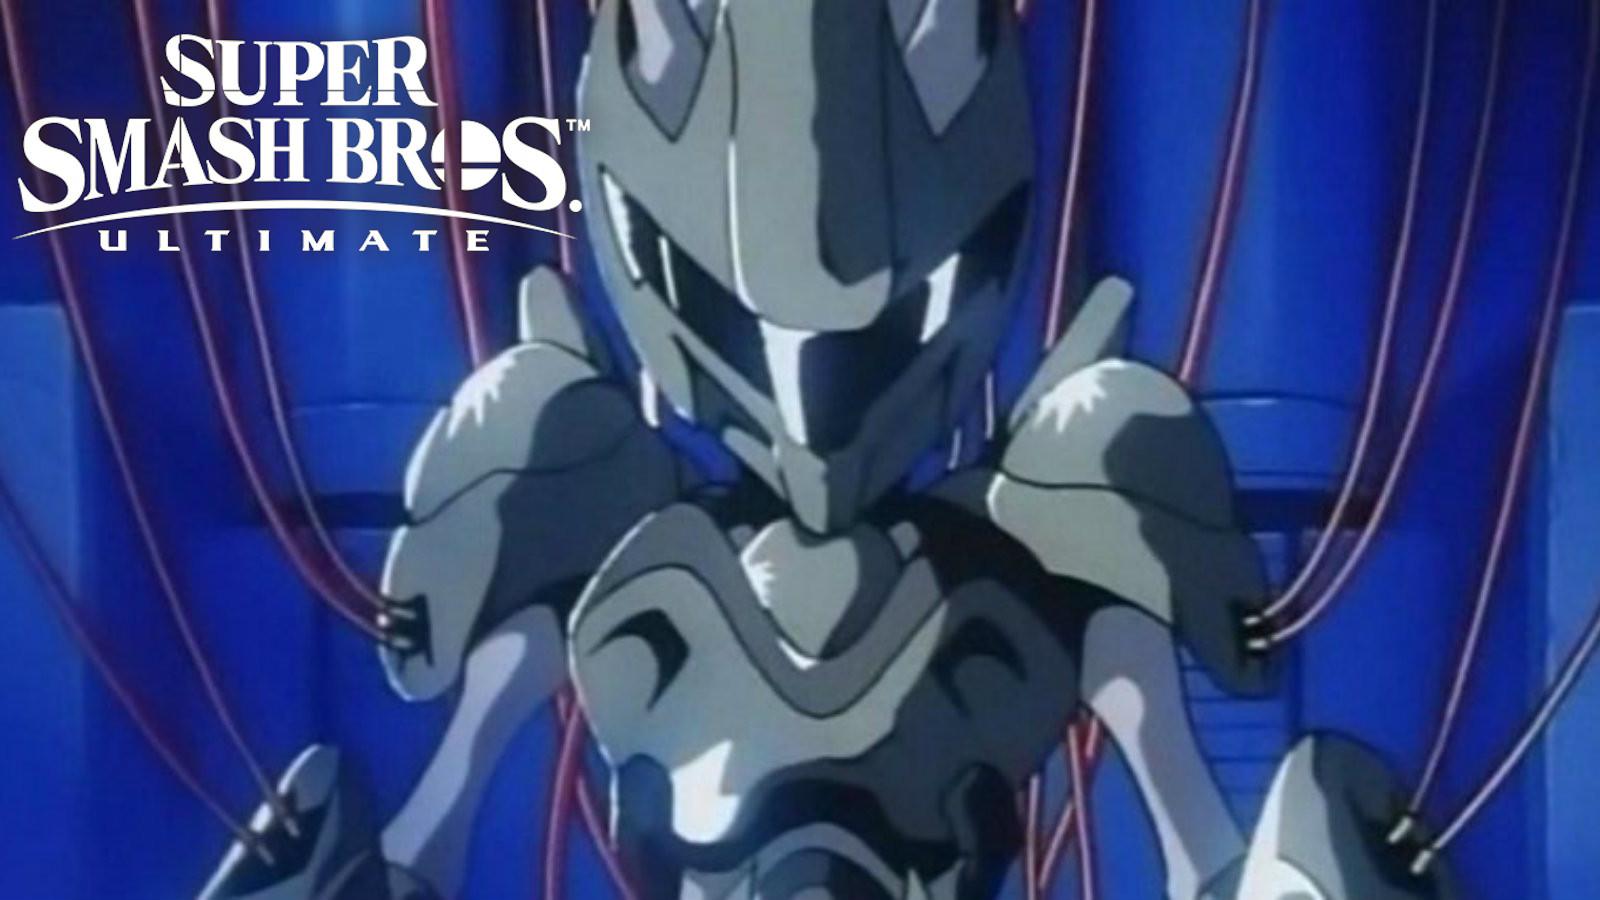 Armored Mewtwo!  Pokemon pictures, Pokemon characters, Mewtwo